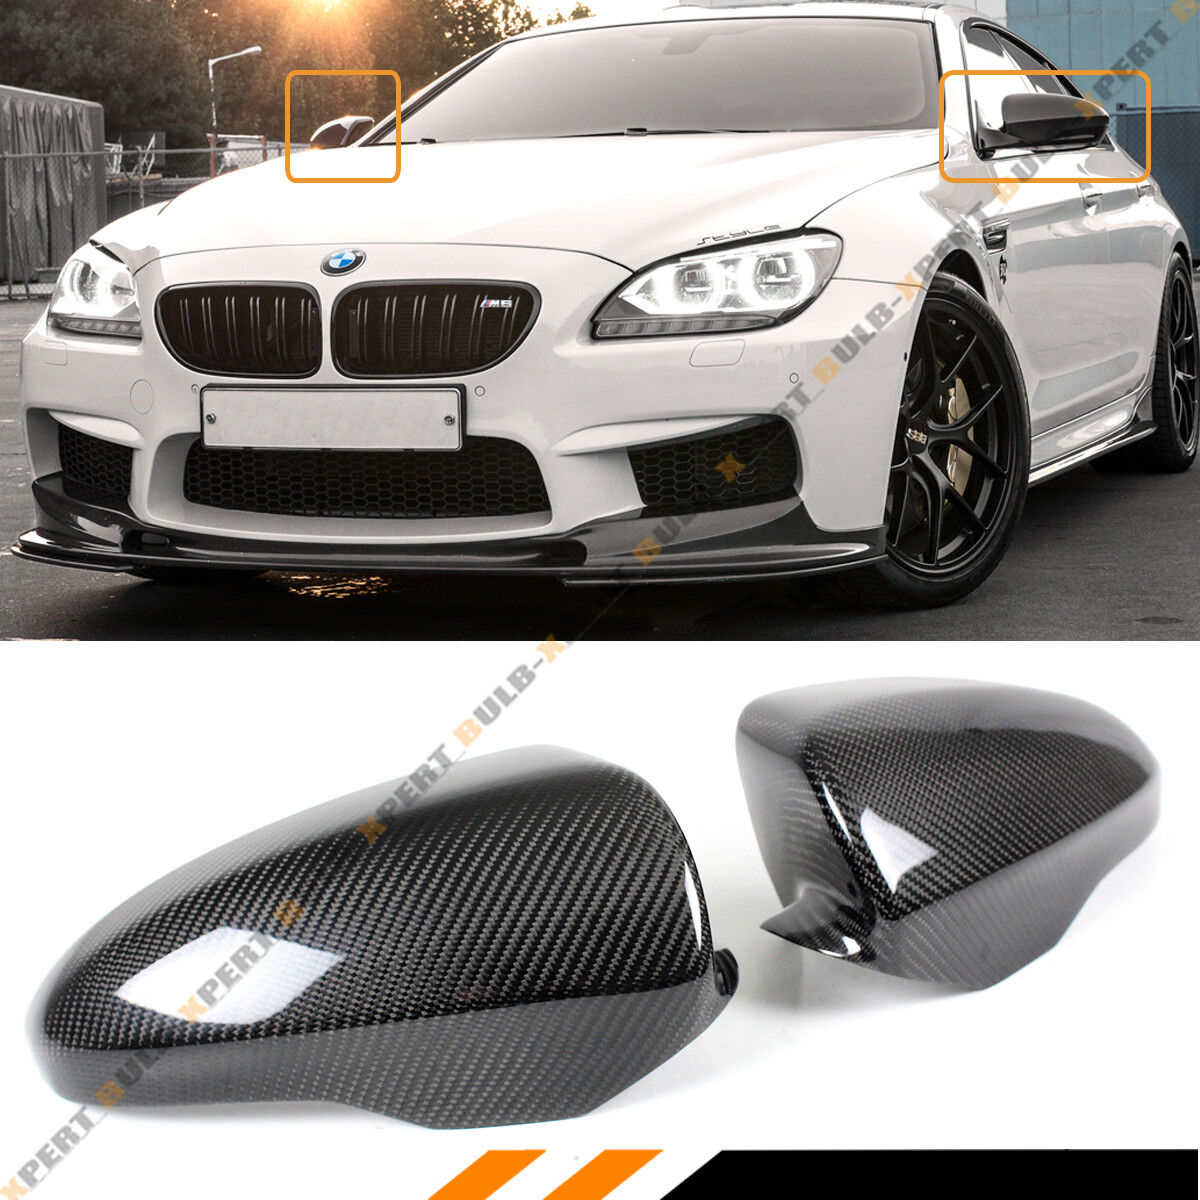 DIRECT ADD ON CARBON FIBER SIDE MIRROR COVERS CAP FOR 2012-18 BMW F06 F12 F13 M6